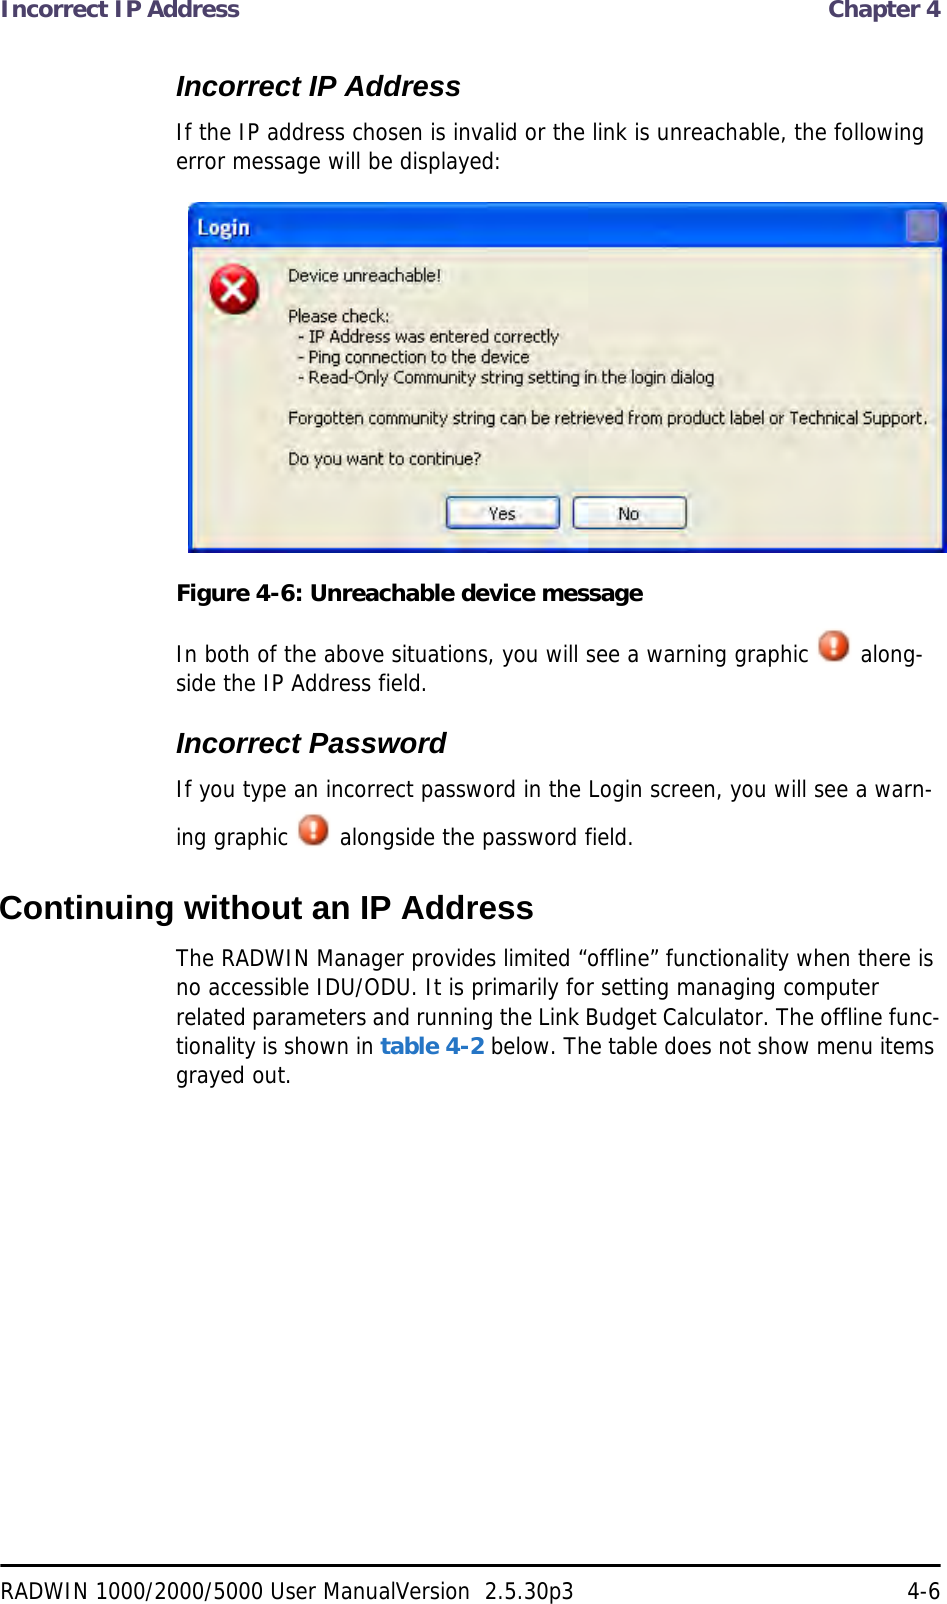 Incorrect IP Address  Chapter 4RADWIN 1000/2000/5000 User ManualVersion  2.5.30p3 4-6Incorrect IP AddressIf the IP address chosen is invalid or the link is unreachable, the following error message will be displayed:Figure 4-6: Unreachable device messageIn both of the above situations, you will see a warning graphic   along-side the IP Address field.Incorrect PasswordIf you type an incorrect password in the Login screen, you will see a warn-ing graphic   alongside the password field.Continuing without an IP AddressThe RADWIN Manager provides limited “offline” functionality when there is no accessible IDU/ODU. It is primarily for setting managing computer related parameters and running the Link Budget Calculator. The offline func-tionality is shown in table 4-2 below. The table does not show menu items grayed out.